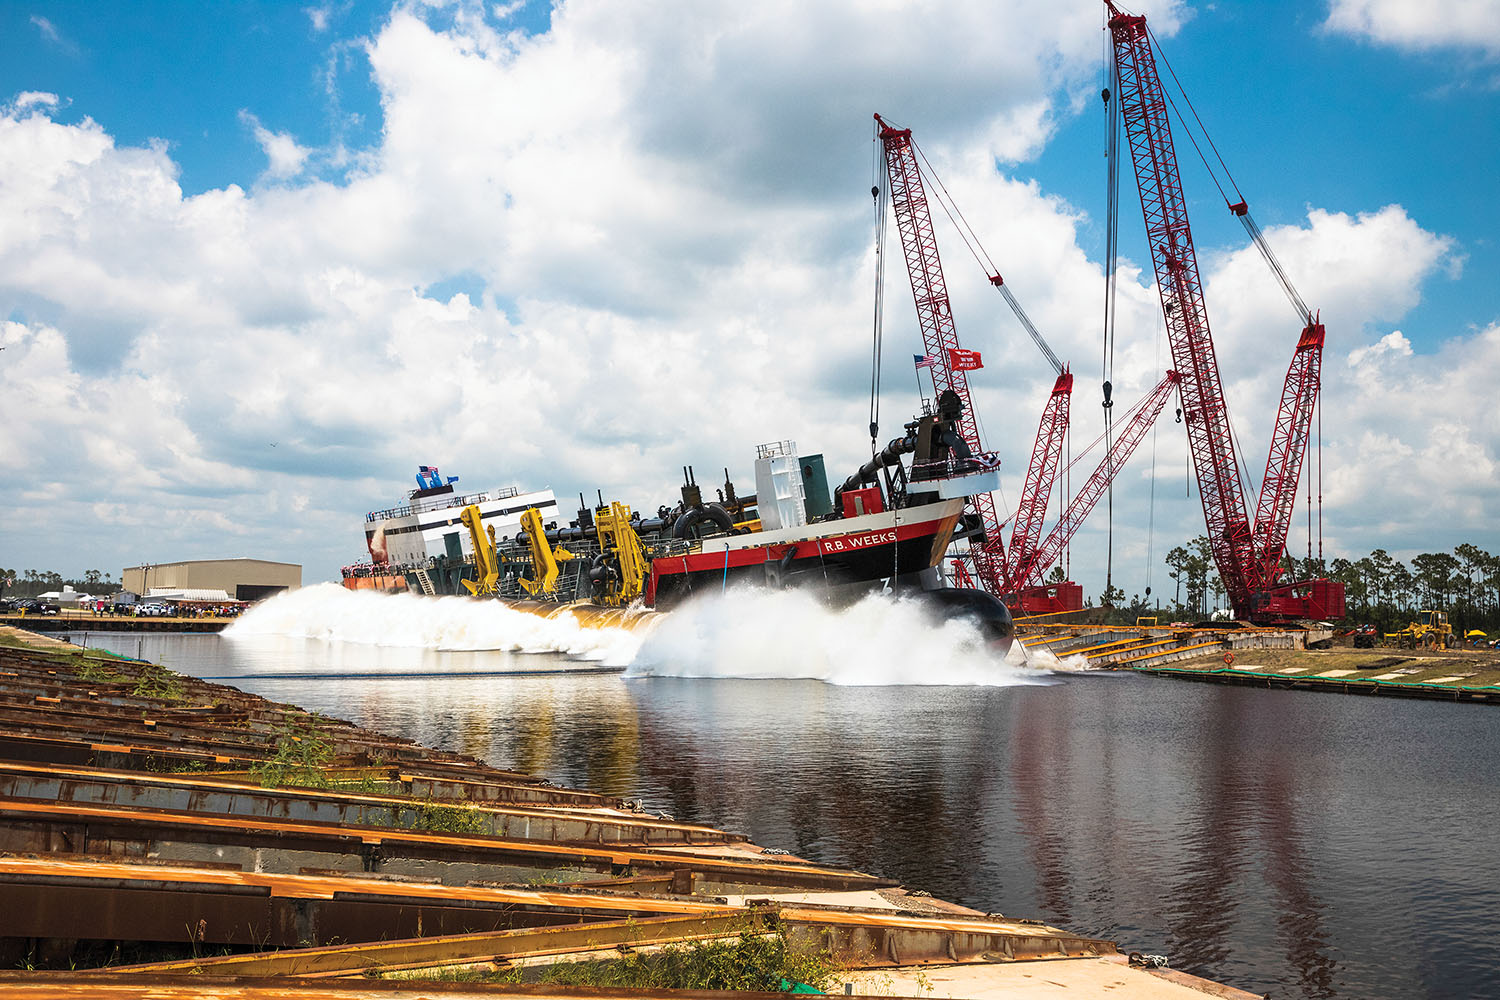 The trailing suction hopper dredge R.B. Weeks hits the water at Eastern Shipbuilding group’s Allanton Shipyard. The dredge, a sister to the Magadalen, is being built for Weeks Marine. (Photo courtesy of Eastern Shipbuilding)